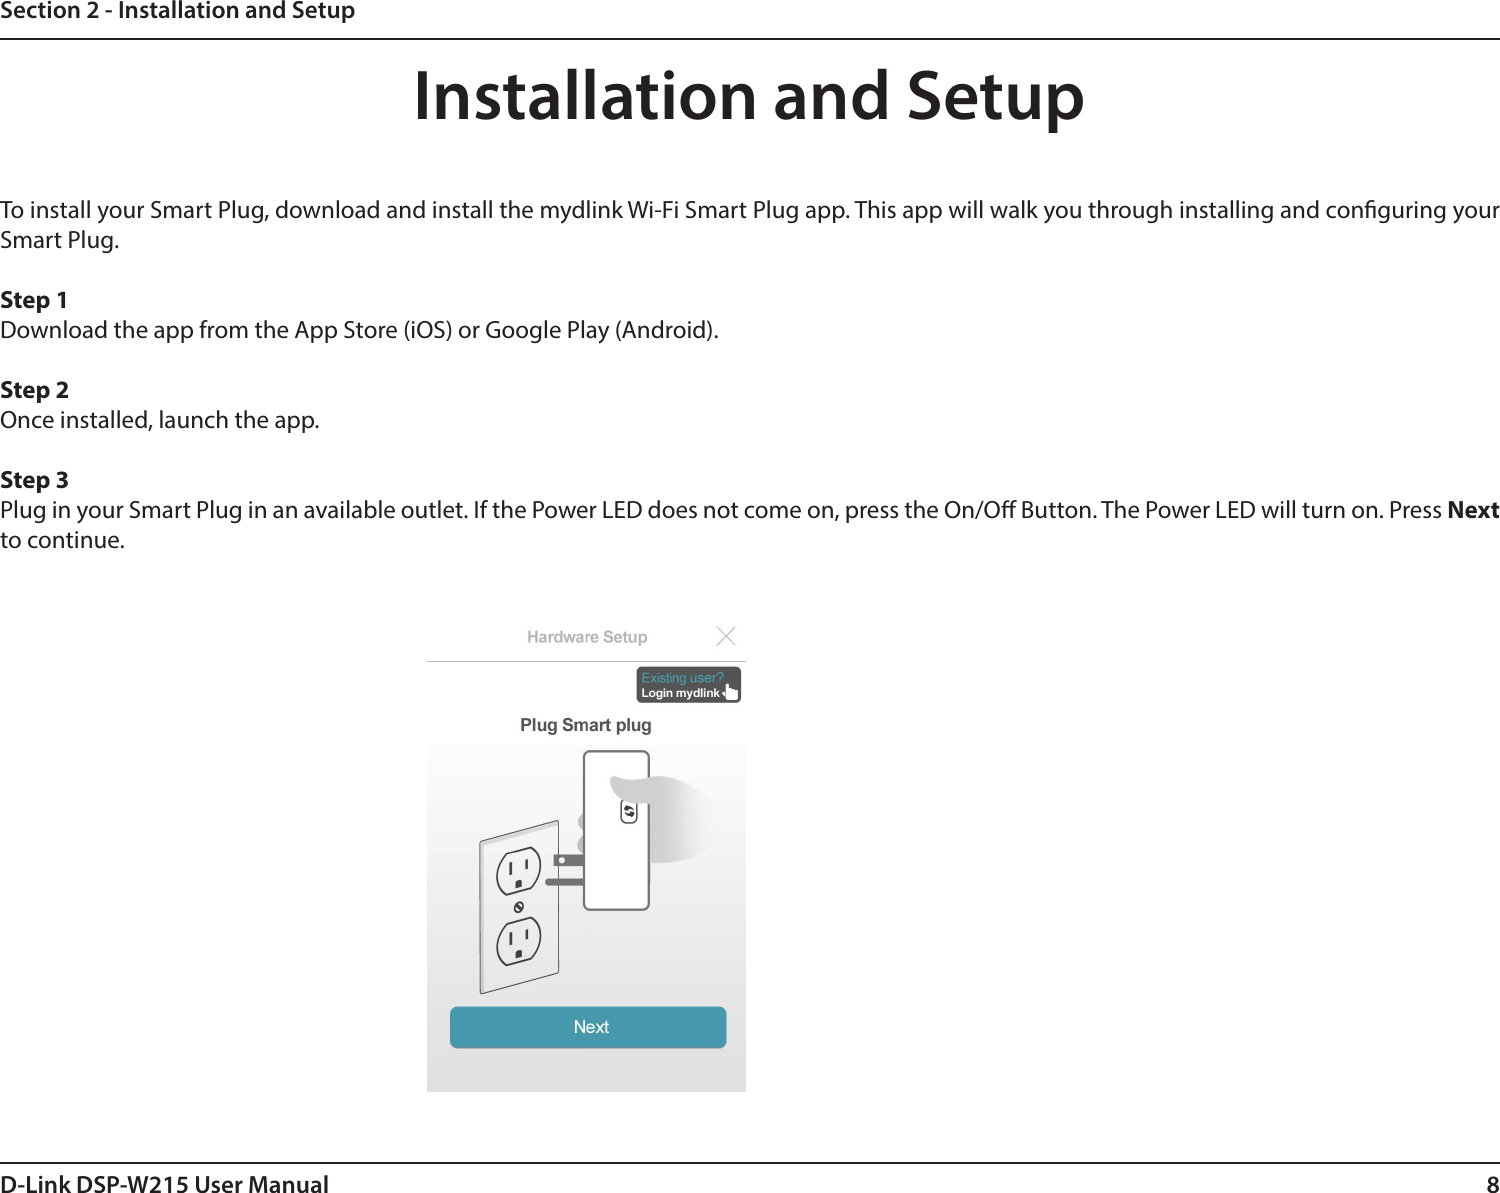 8D-Link DSP-W215 User ManualSection 2 - Installation and SetupInstallation and SetupTo install your Smart Plug, download and install the mydlink Wi-Fi Smart Plug app. This app will walk you through installing and conguring your  Smart Plug.Step 1Download the app from the App Store (iOS) or Google Play (Android). Step 2Once installed, launch the app.Step 3Plug in your Smart Plug in an available outlet. If the Power LED does not come on, press the On/O Button. The Power LED will turn on. Press Next to continue.